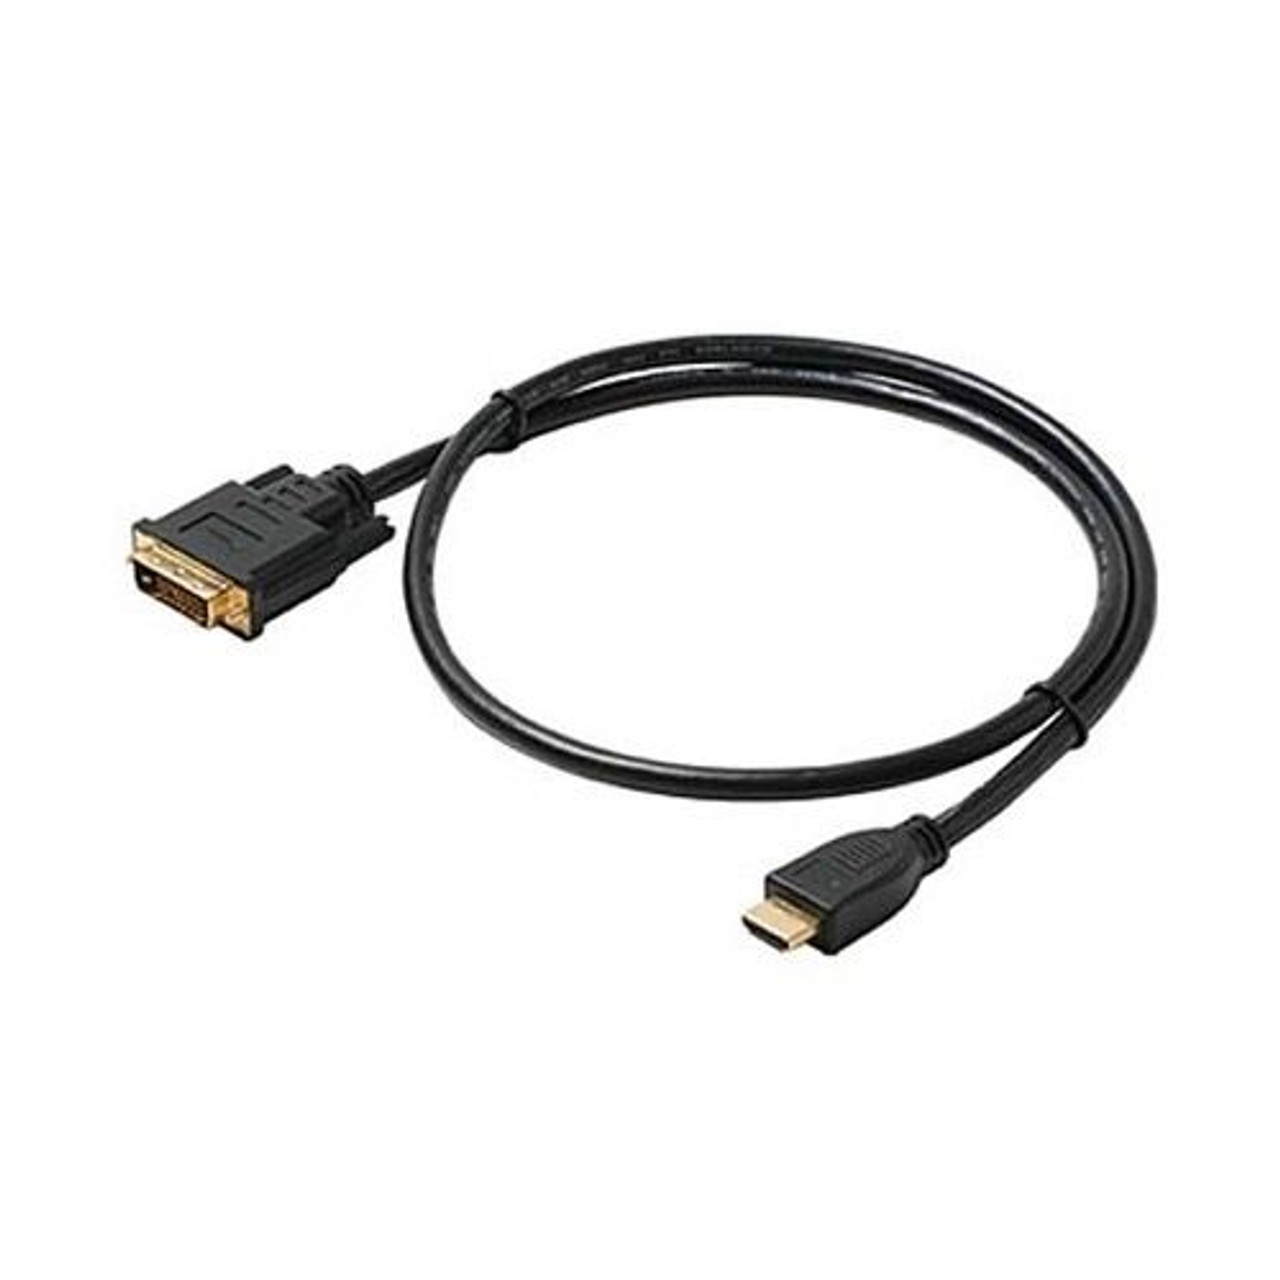 Steren 516-930BK 30' FT DVI to HDMI Cable 24 Pin Male to Male Plug Video Digital Gold Plated Contacts Pure Copper Premium Resolution, Part # 516930-BK